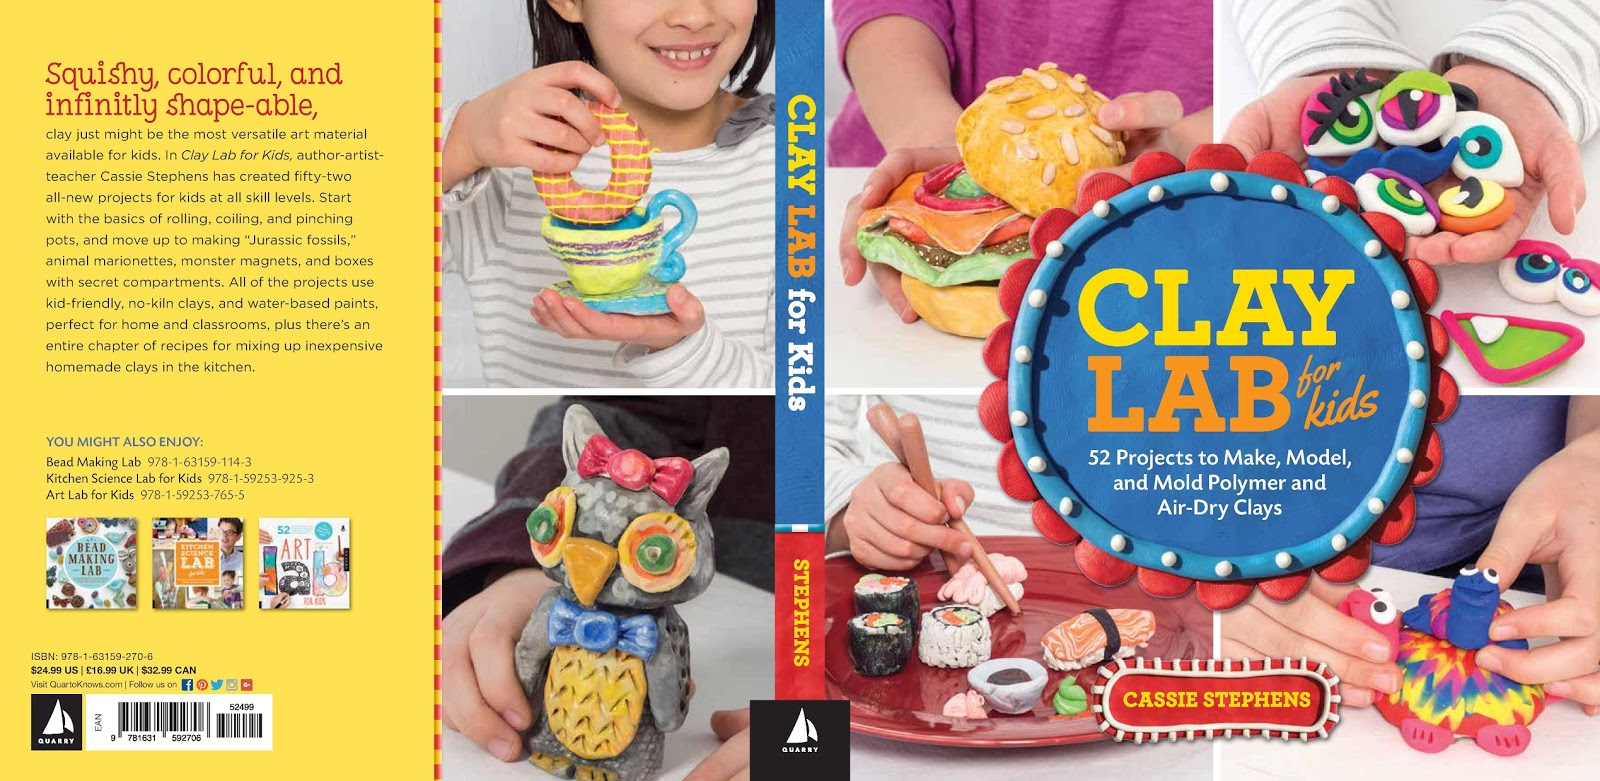 DIY Clay Ideas for Kids: Easy Clay Projects and Instructions